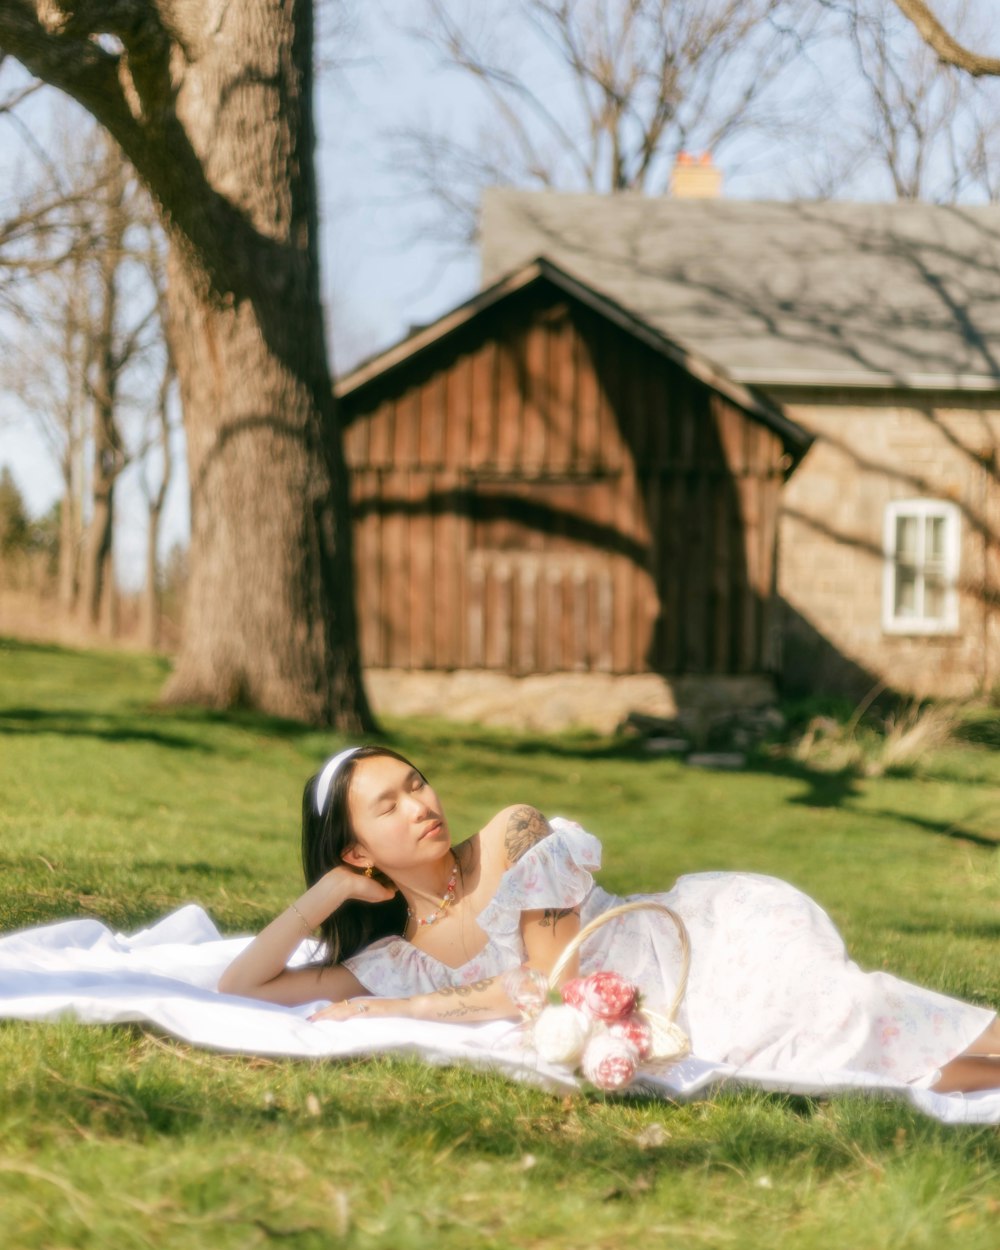 a person in a wedding dress lying on a blanket in a grassy area